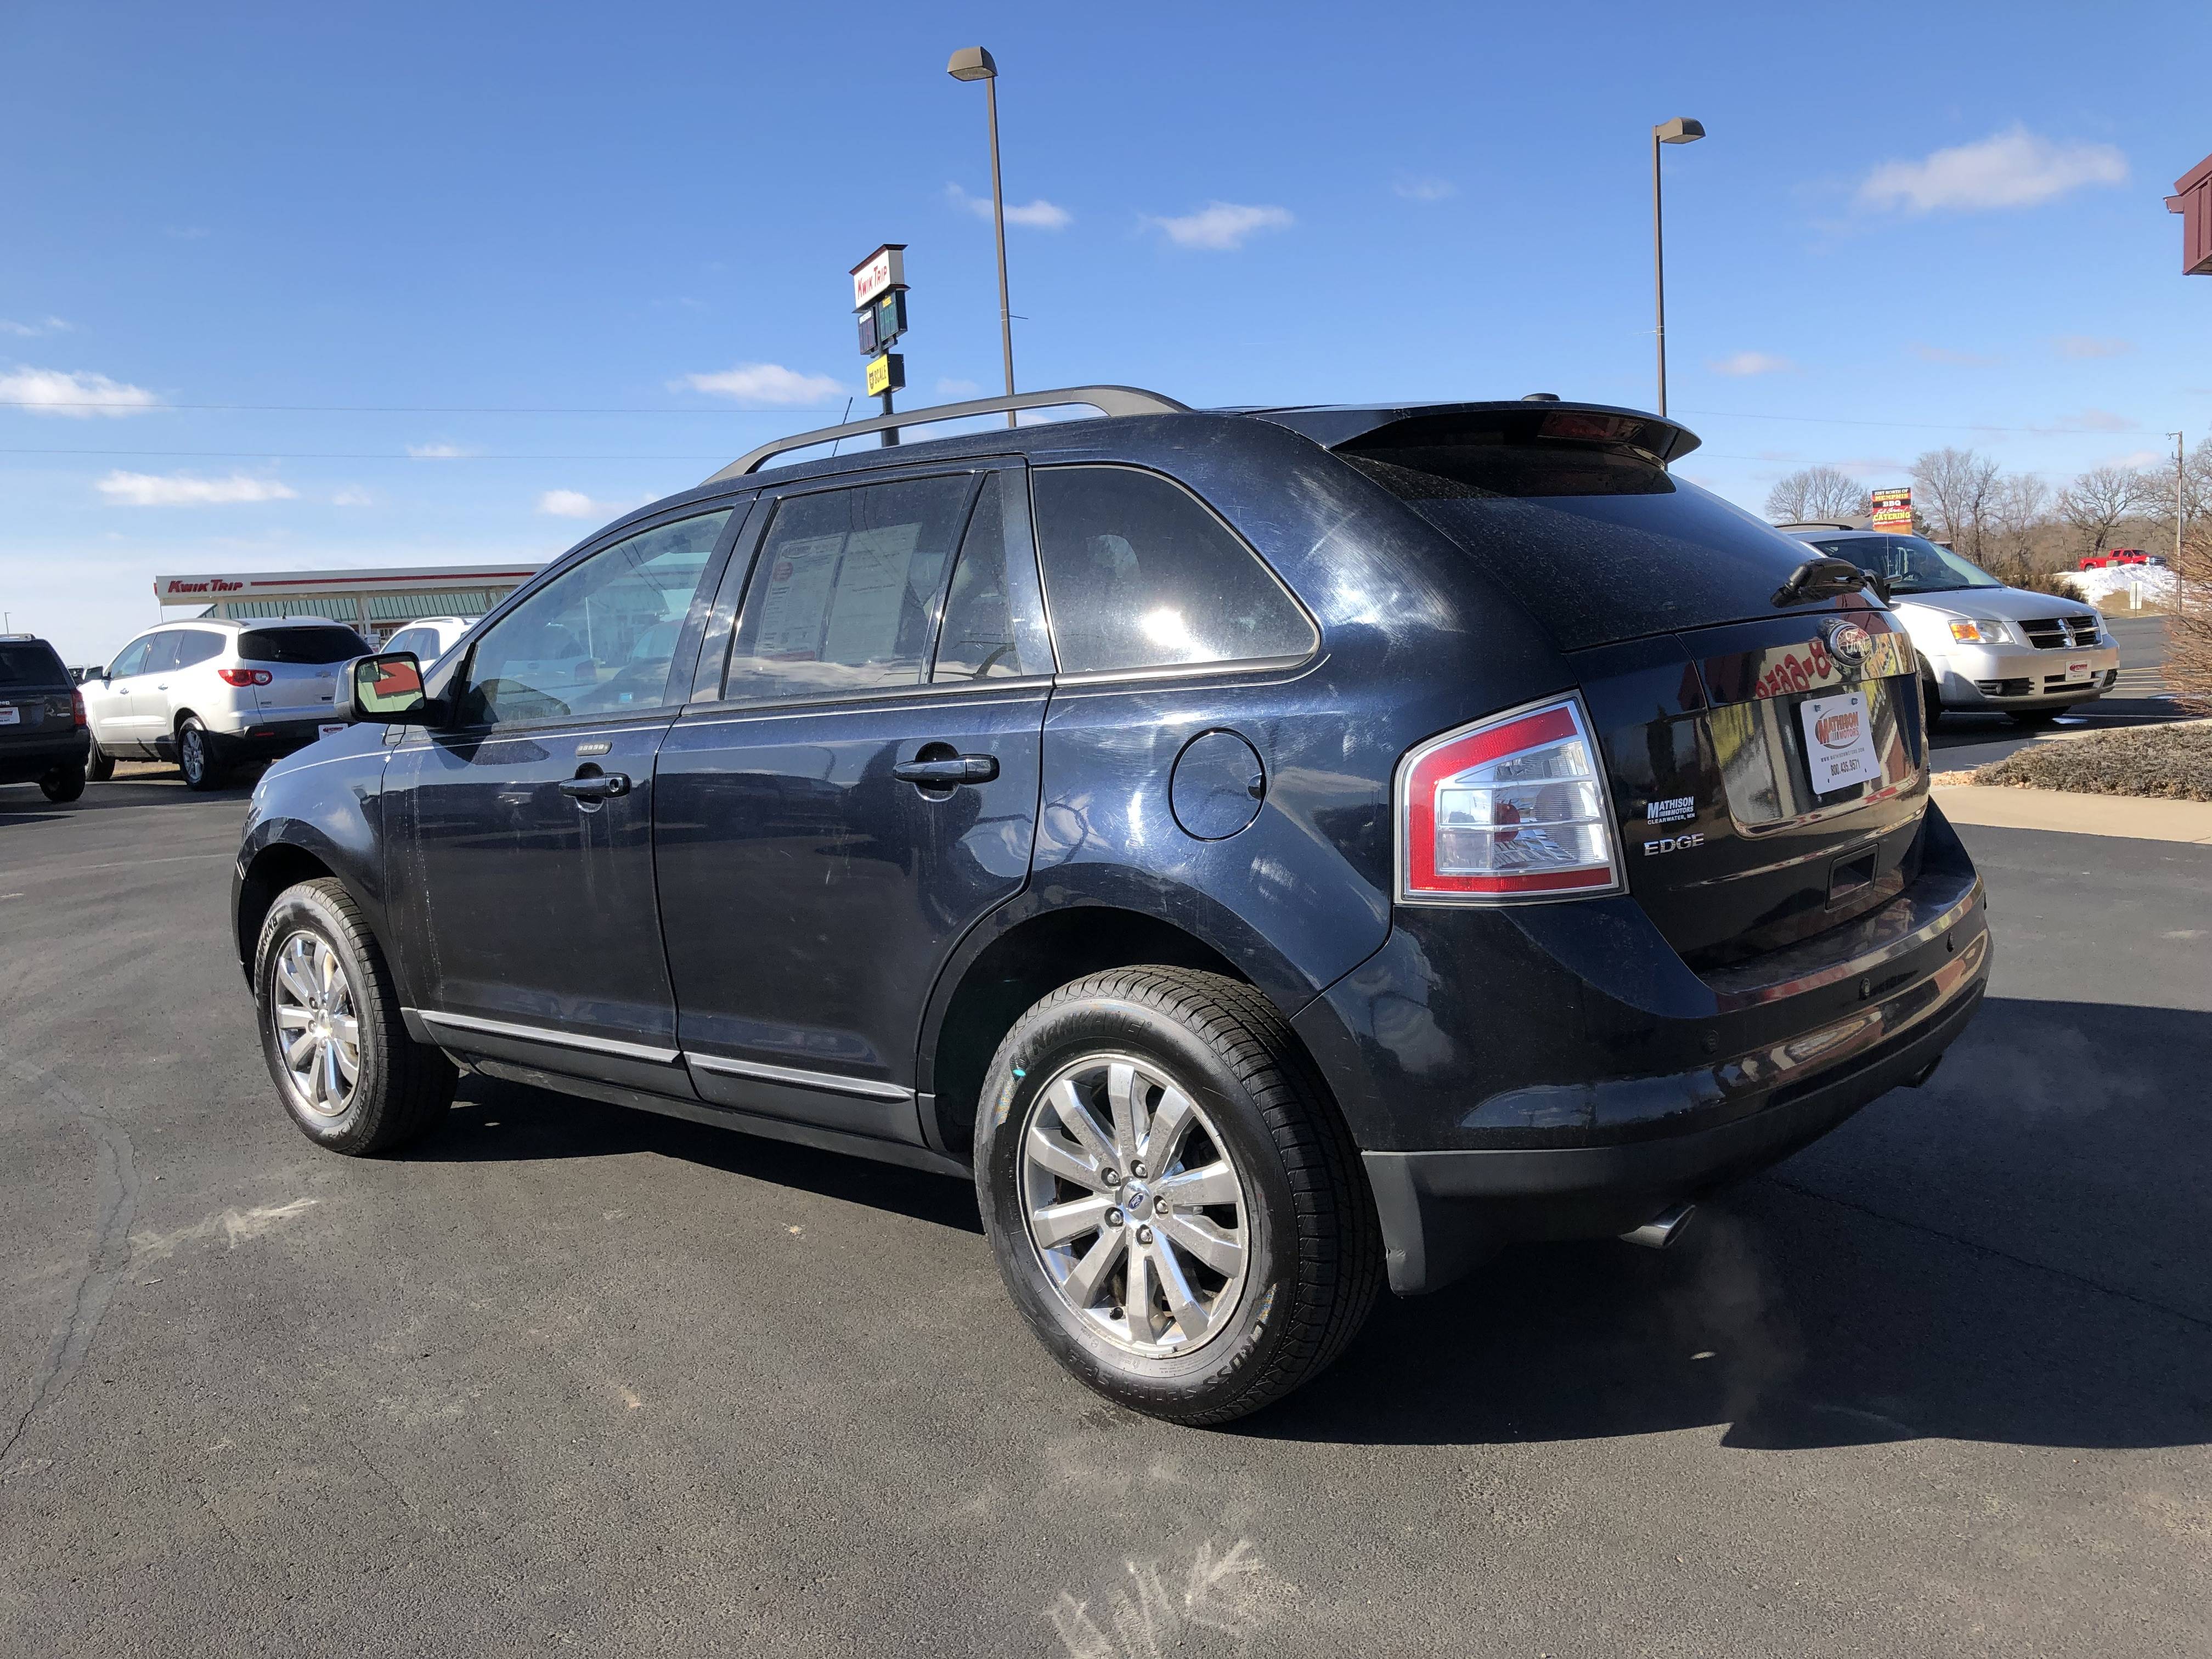 Used 2010 Ford Edge SEL for sale in MATHISON | 22261 | JP Motors Inc